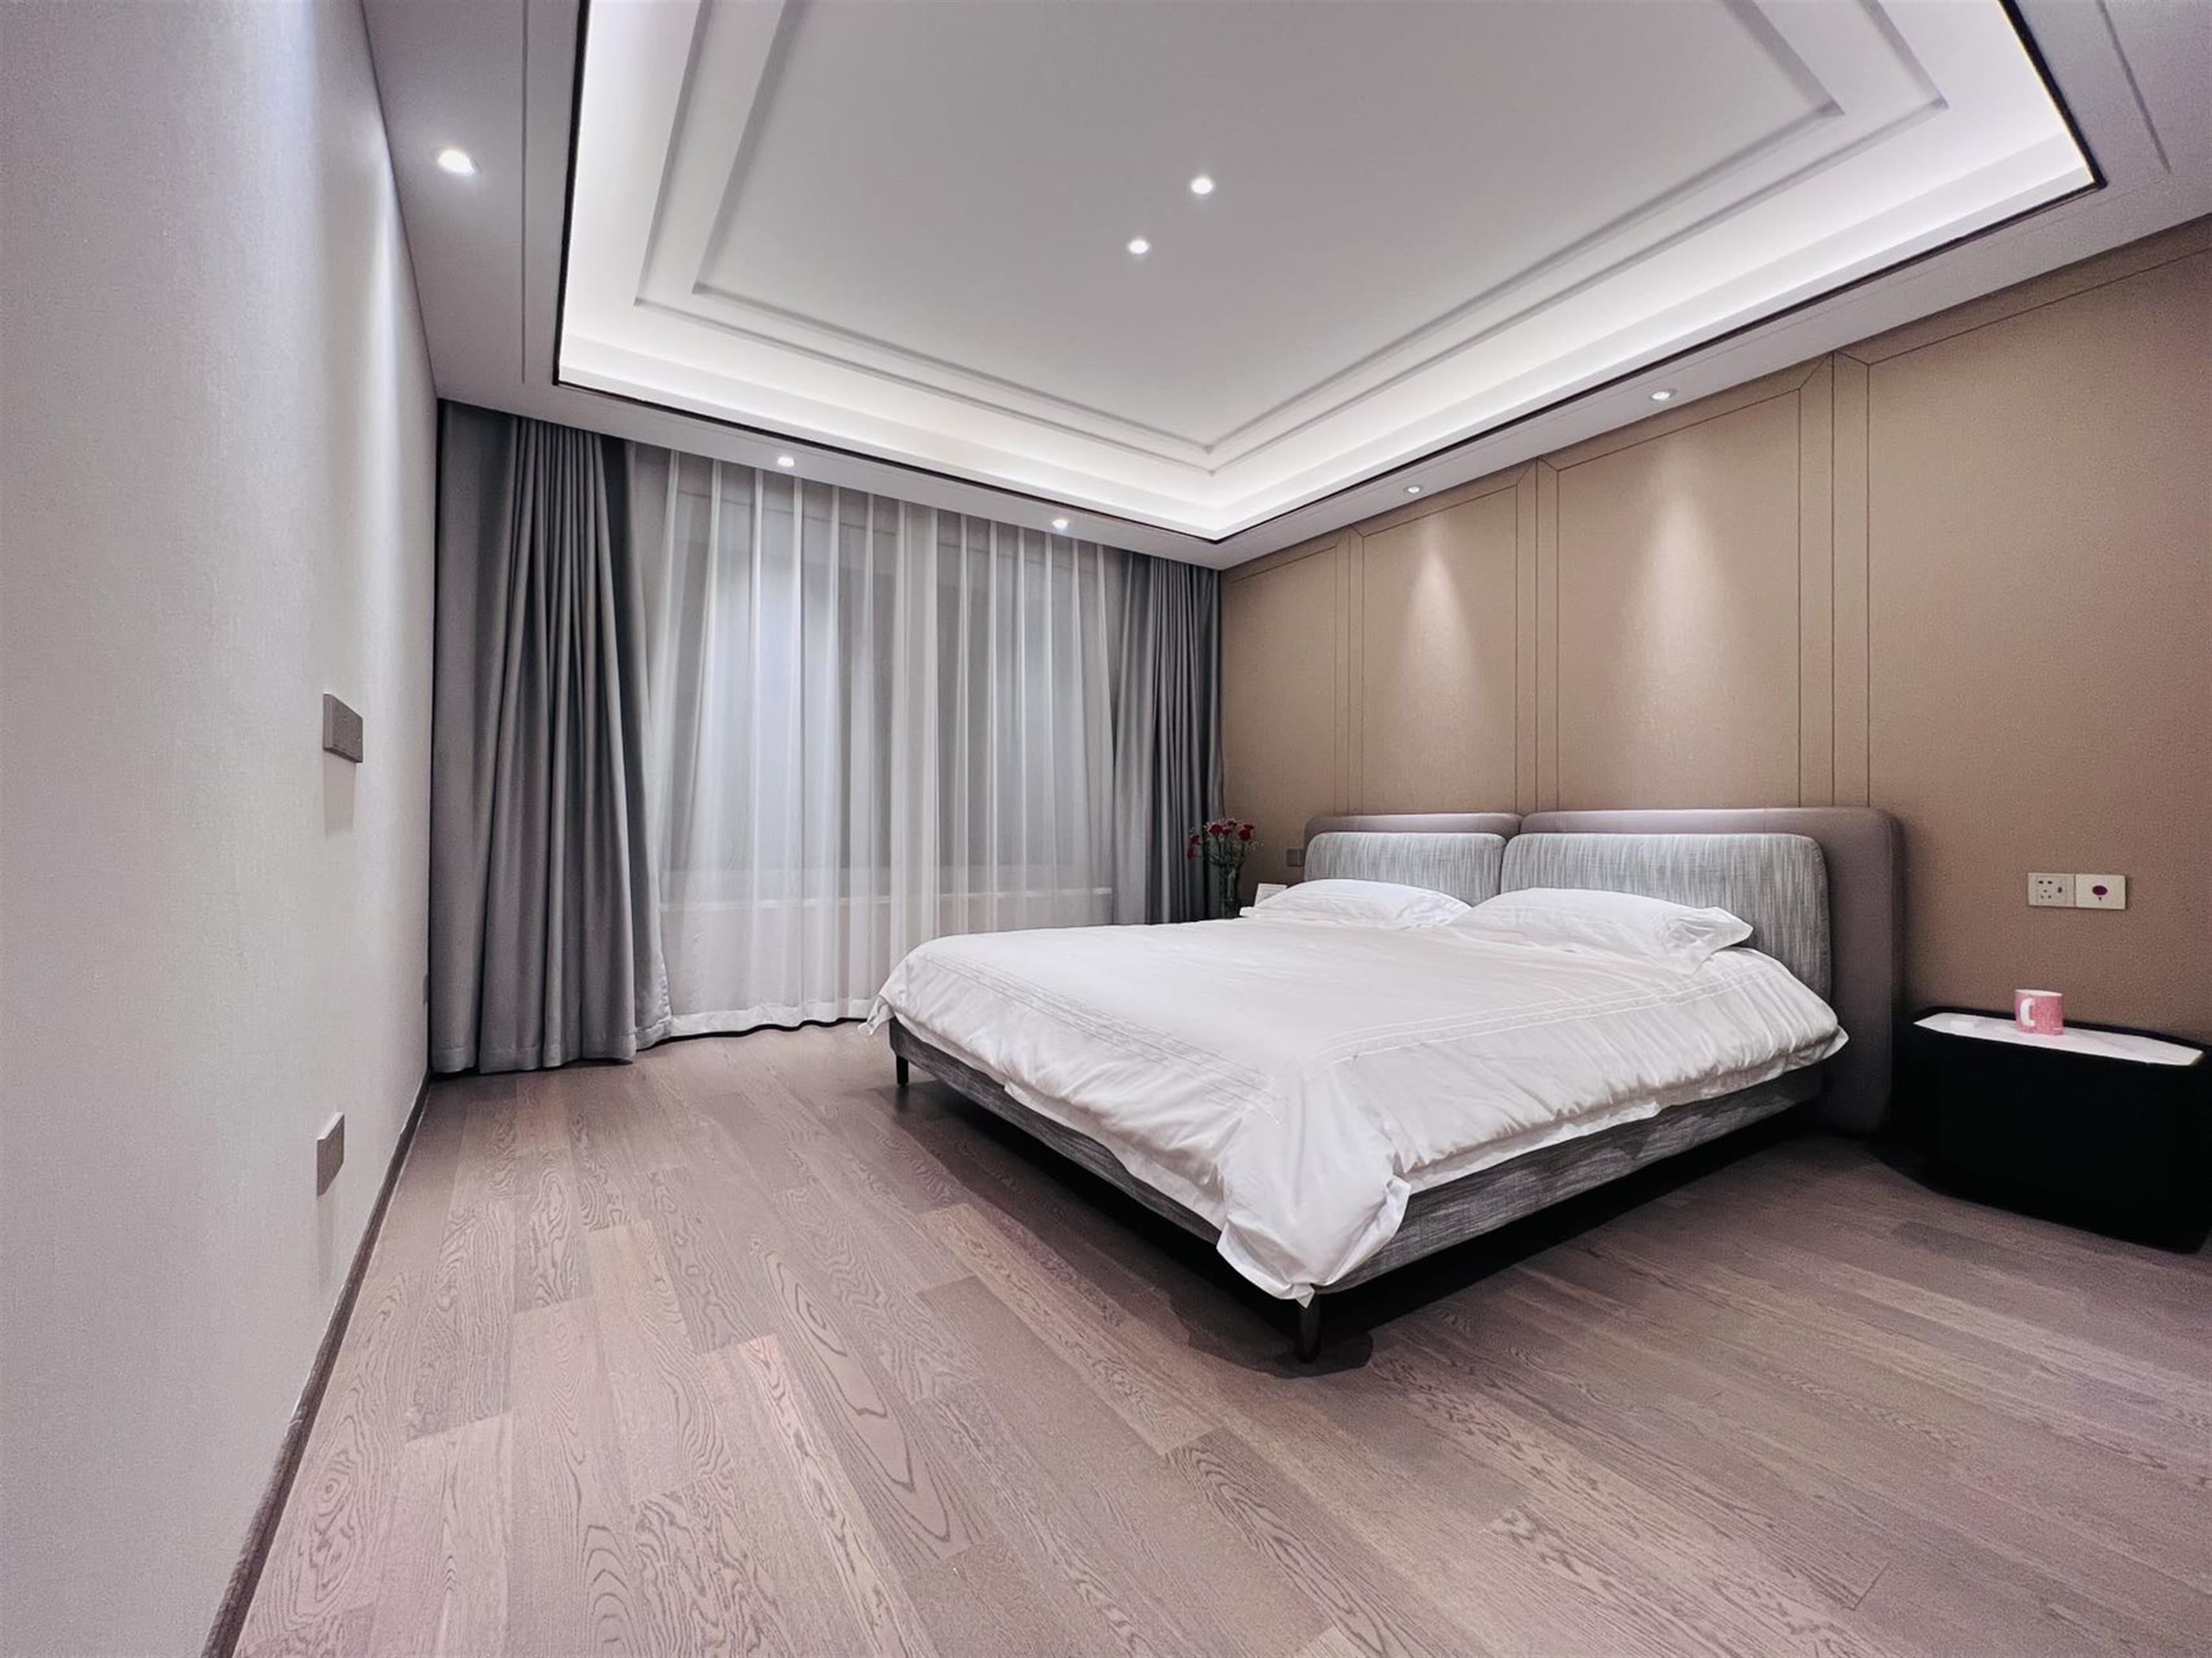 new bedroom Brand New Luxurious 4BR Apartment in Chinatown Complex for Rent in Shanghai